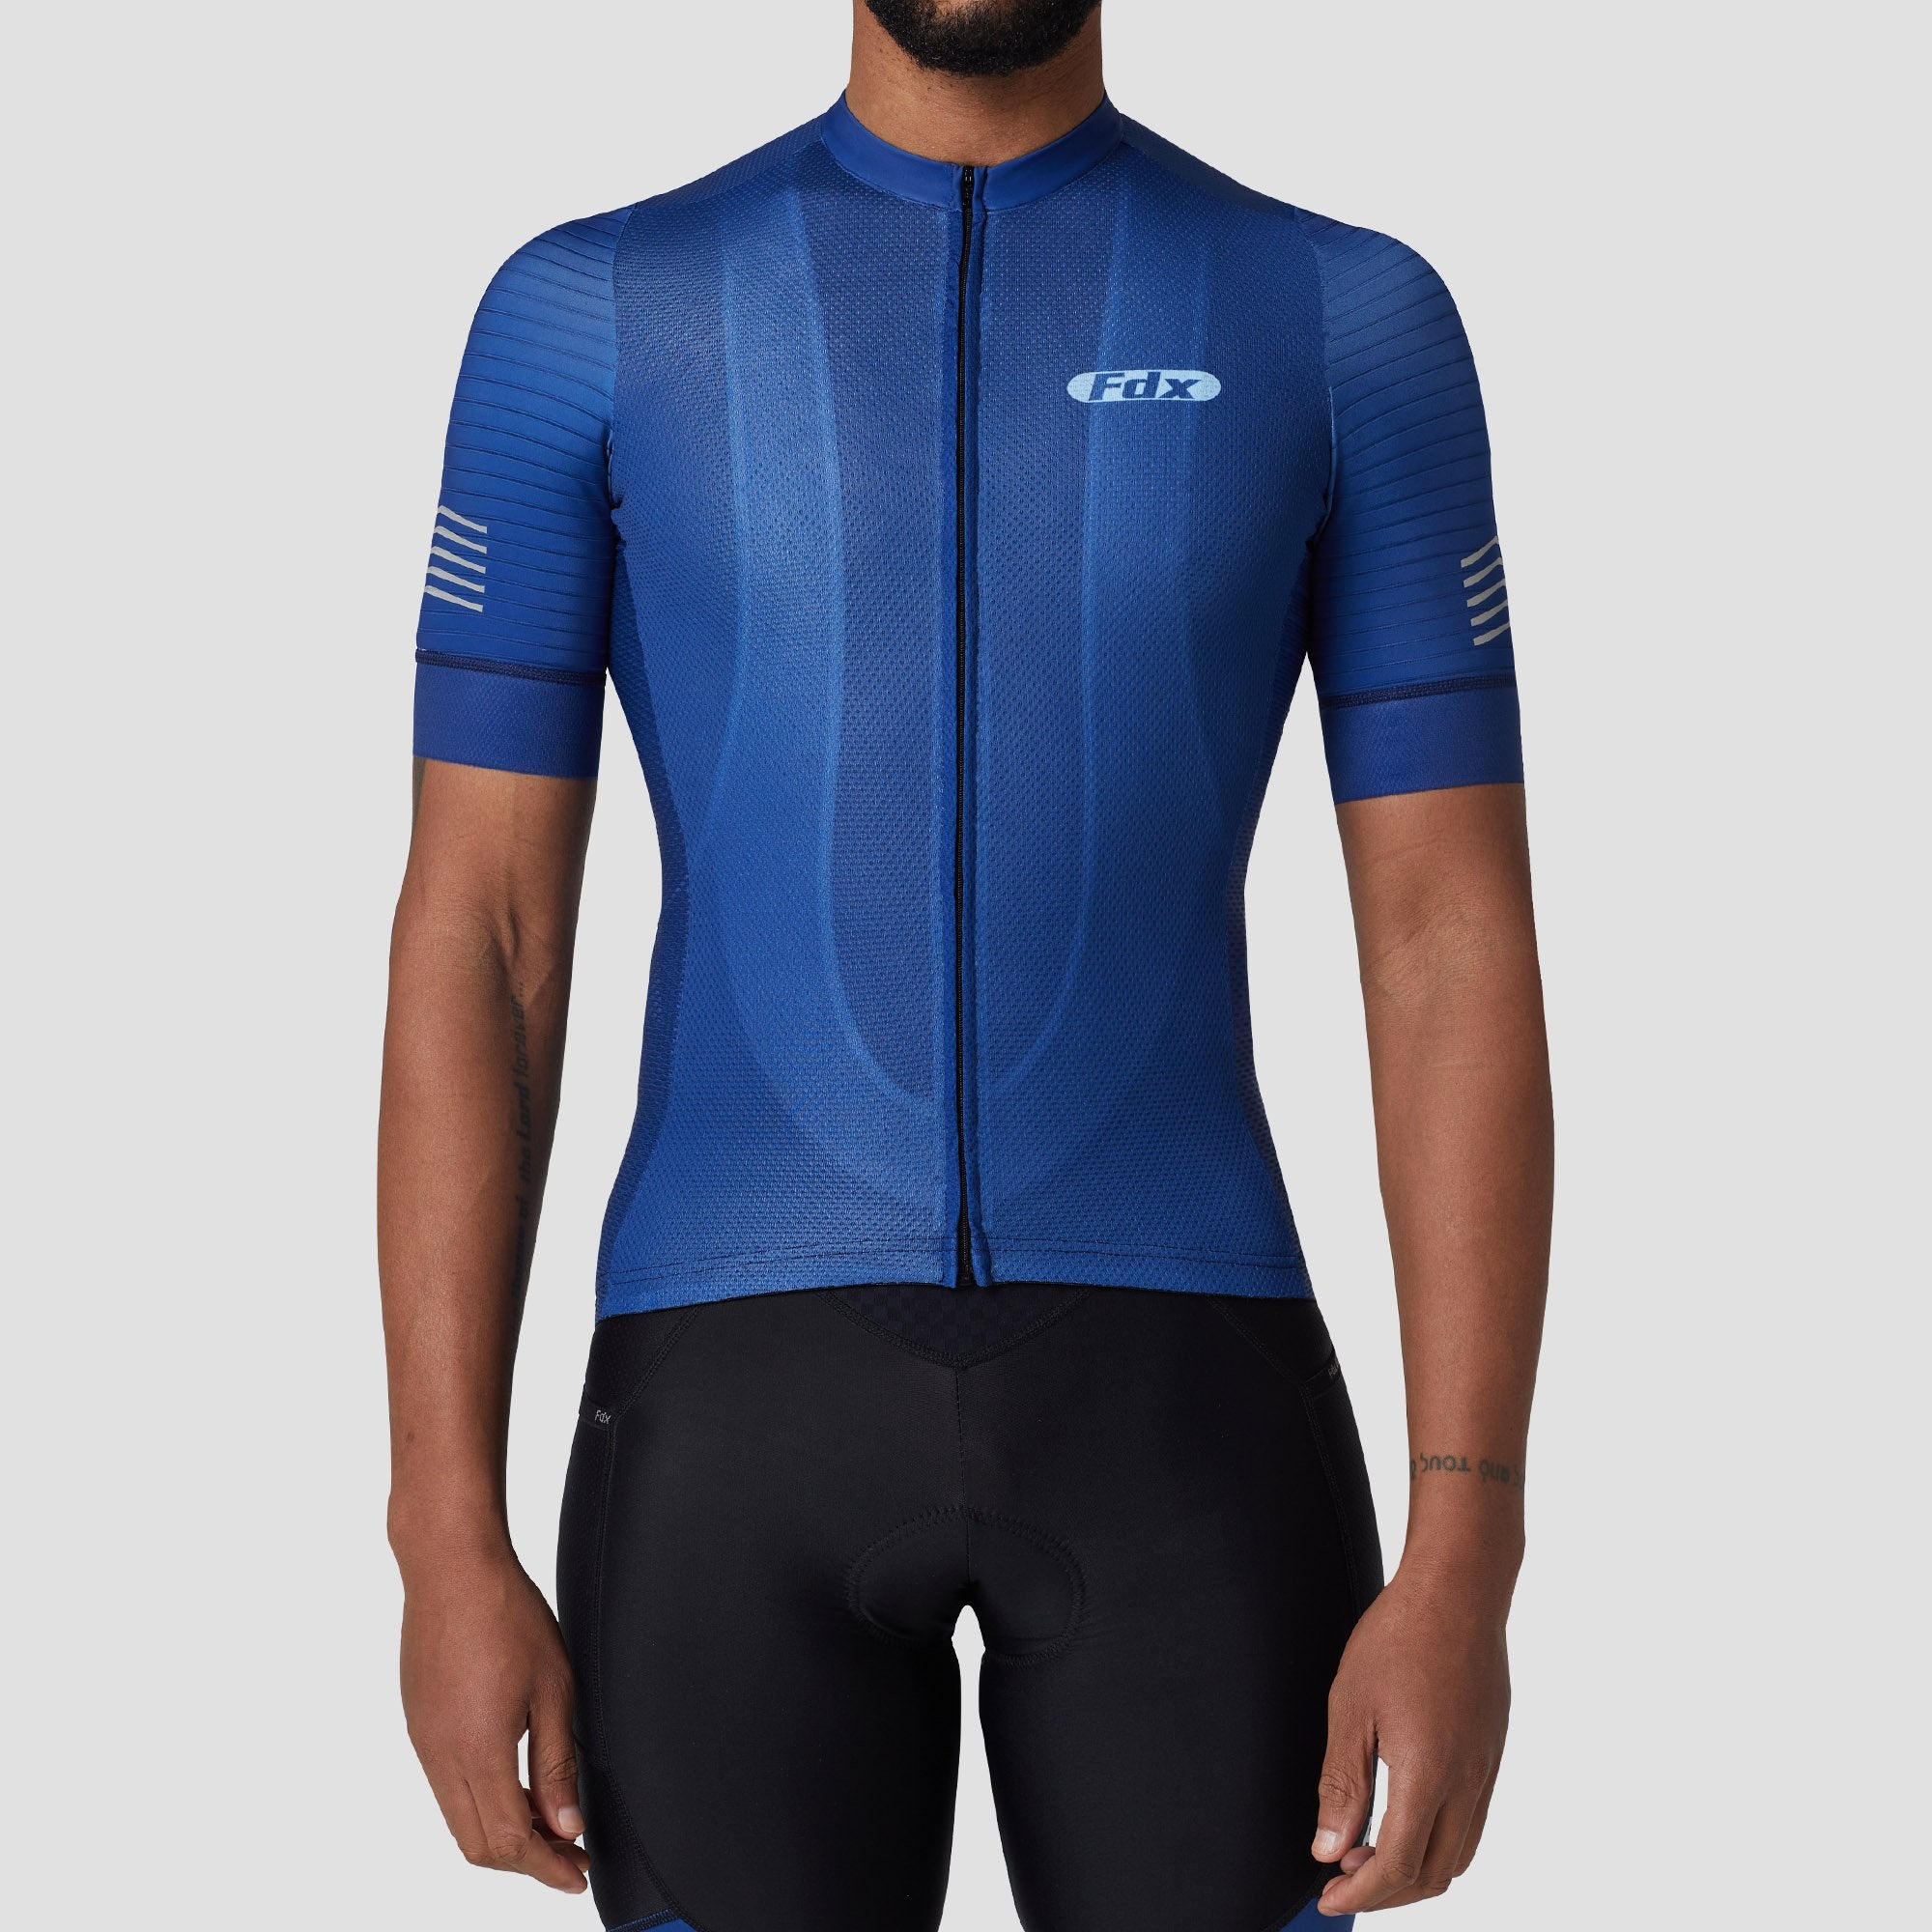 Fdx men’s blue full zip short sleeves best cycling jersey Hi-Viz Reflective details breathable summer lightweight biking top, Hi-Viz Reflective skin friendly half sleeves cycling shirt for indoor & outdoor riding with two back pockets